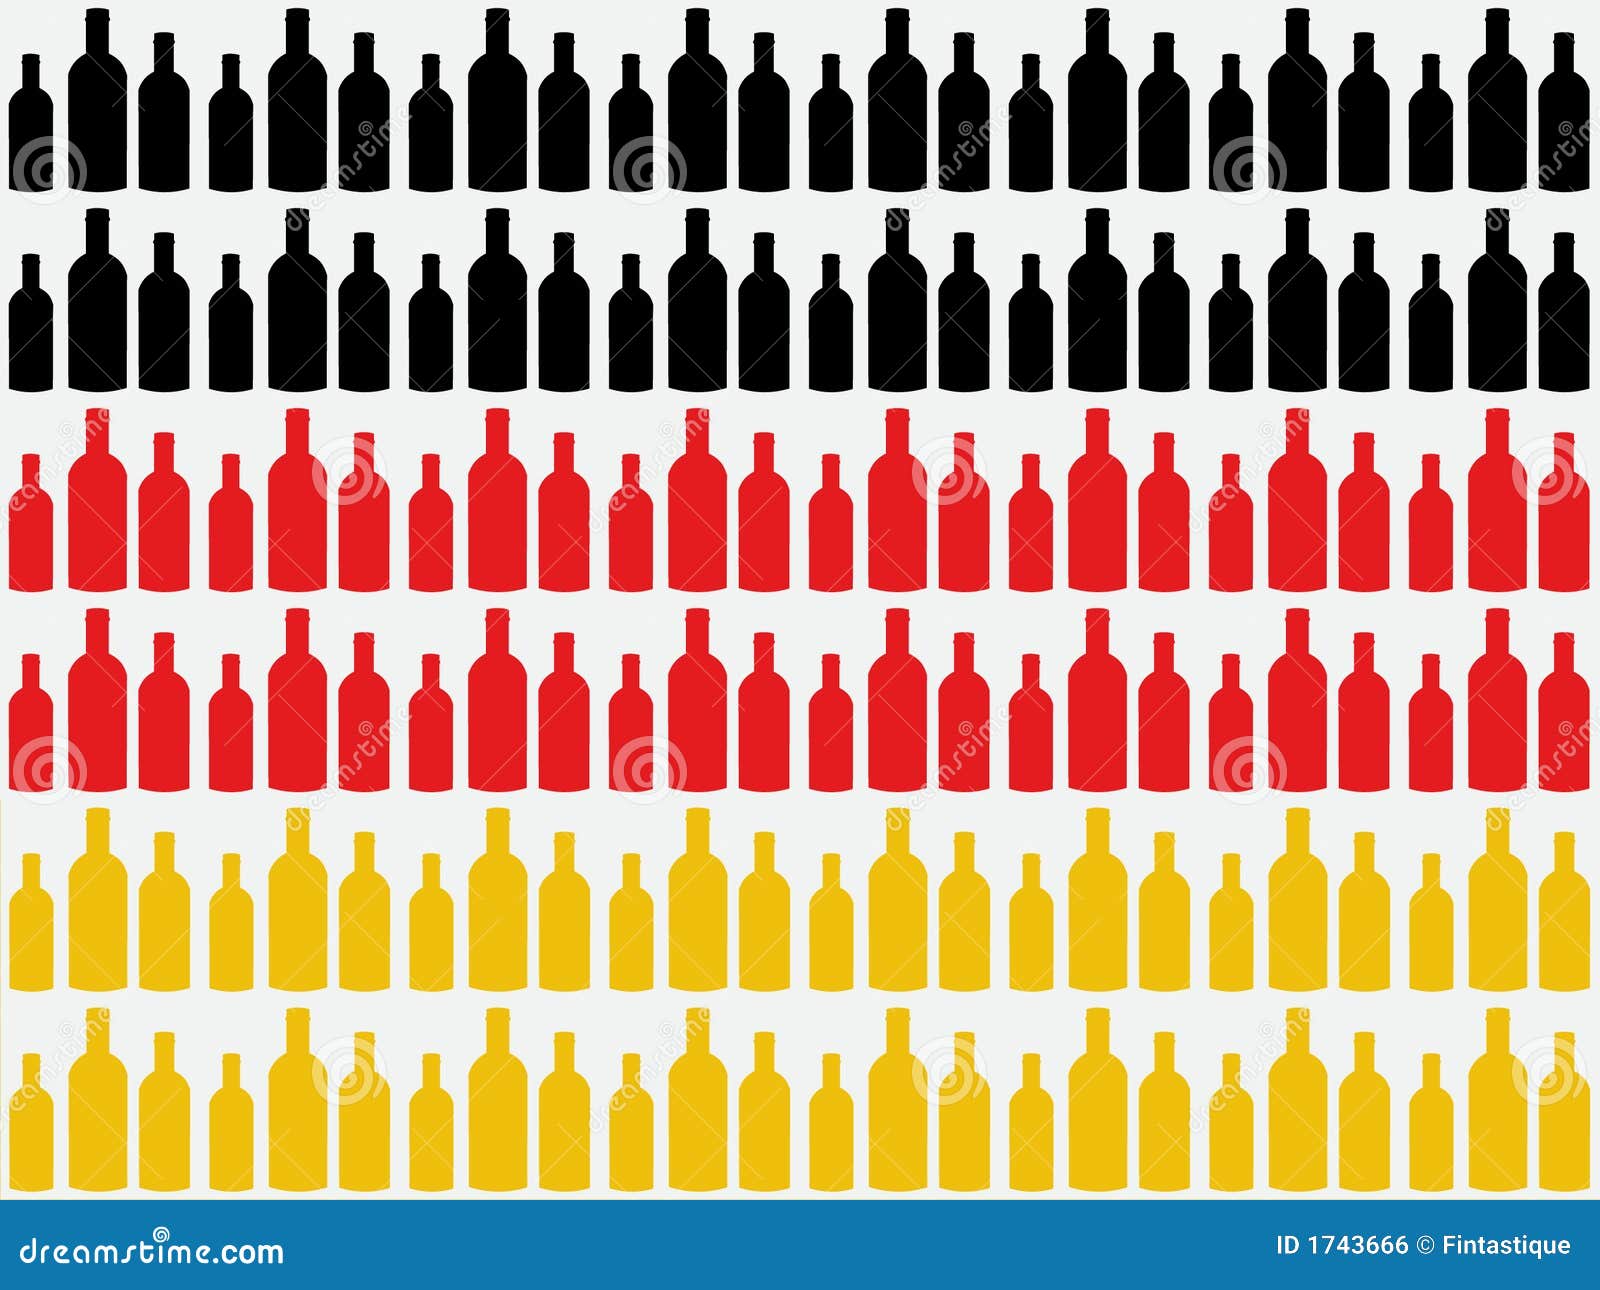 Royalty Free Stock Image: Bottles cut out against German flag